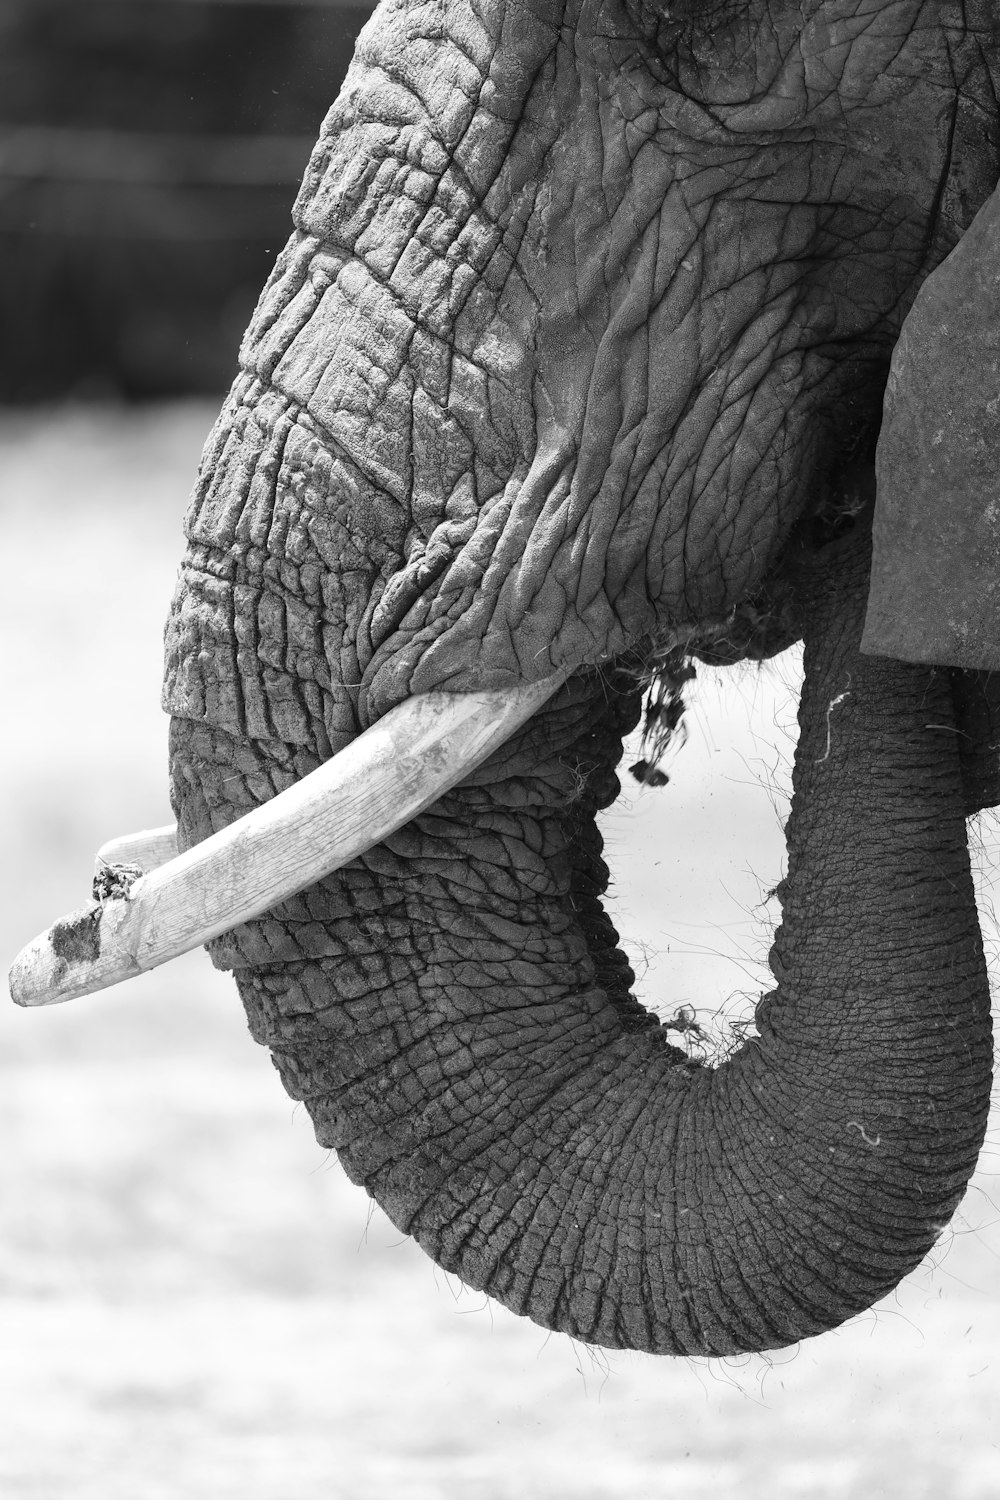 a close up of the trunk of an elephant